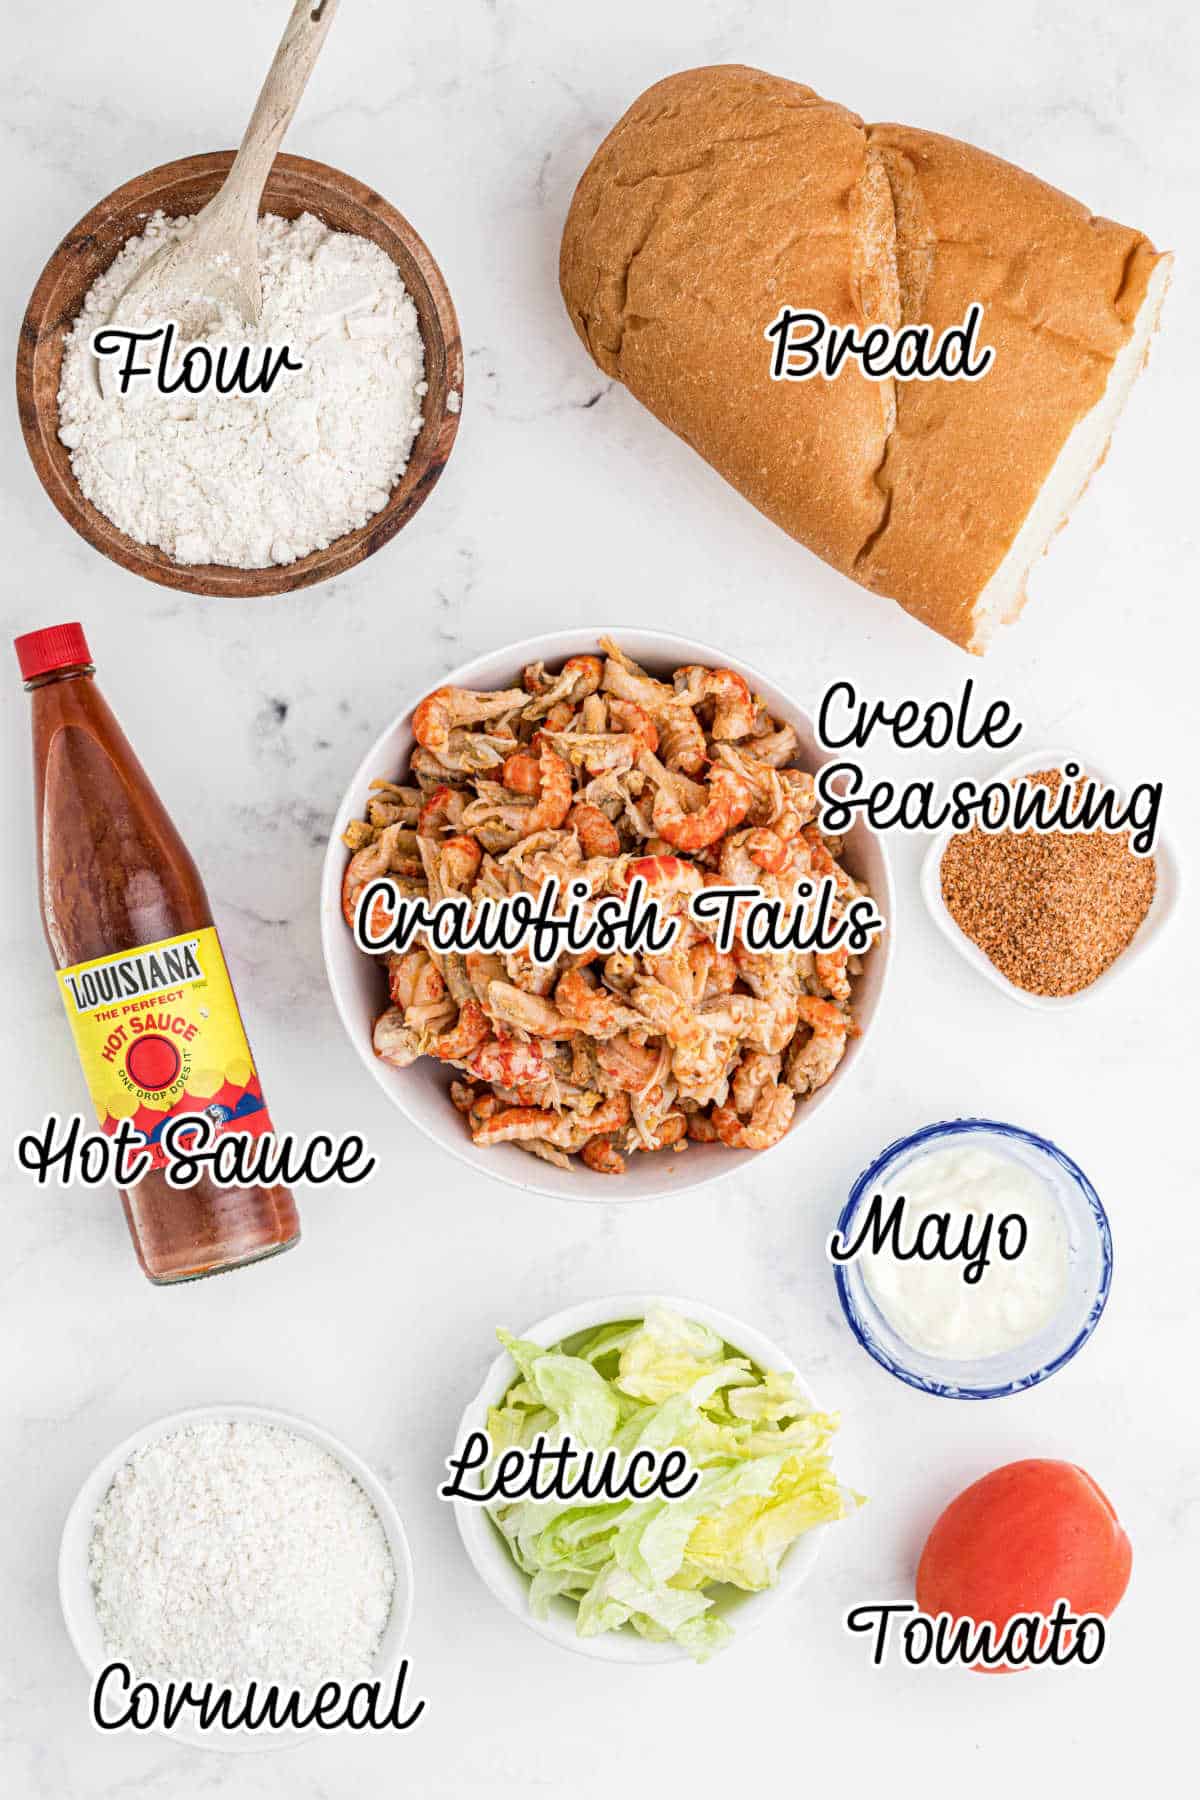 Overhead shot of ingredients needed to make a fried crawfish poboy.